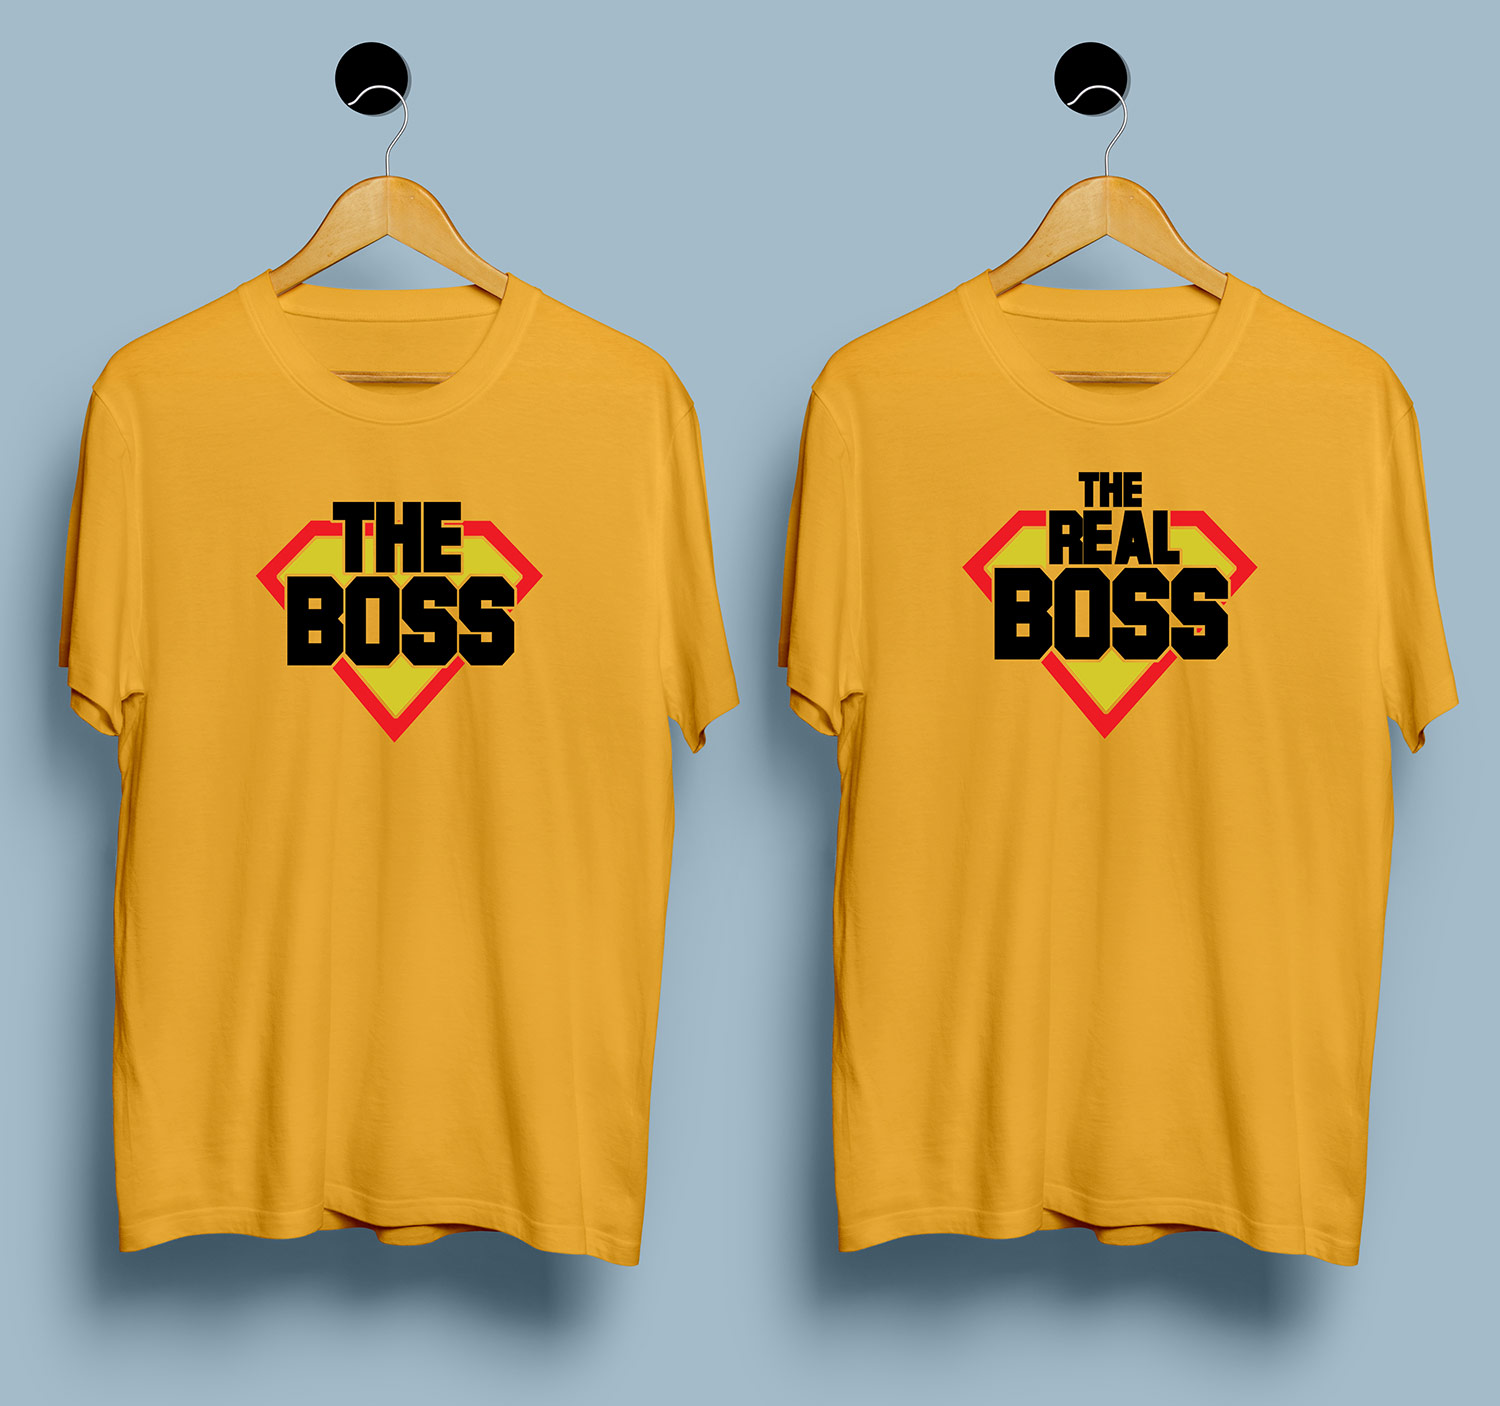 Matching Couple T Shirts - Buy The Boss The Real Boss Couple T Shirt Online